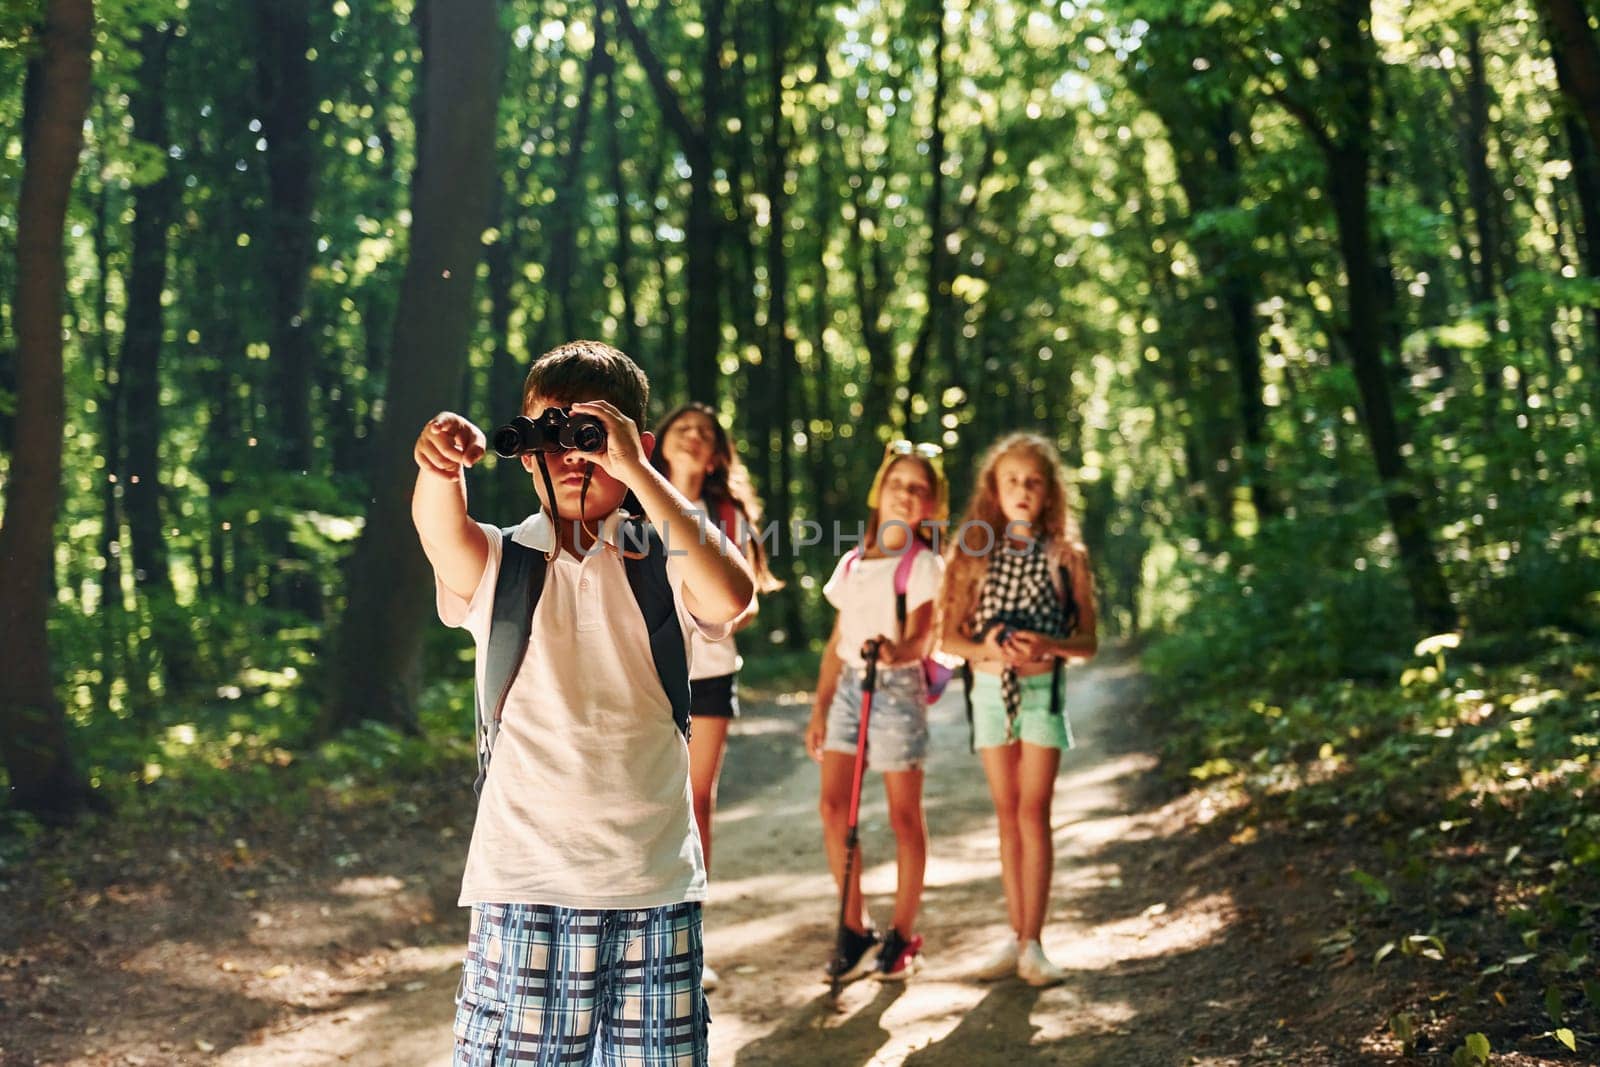 Beautiful nature. Kids strolling in the forest with travel equipment by Standret